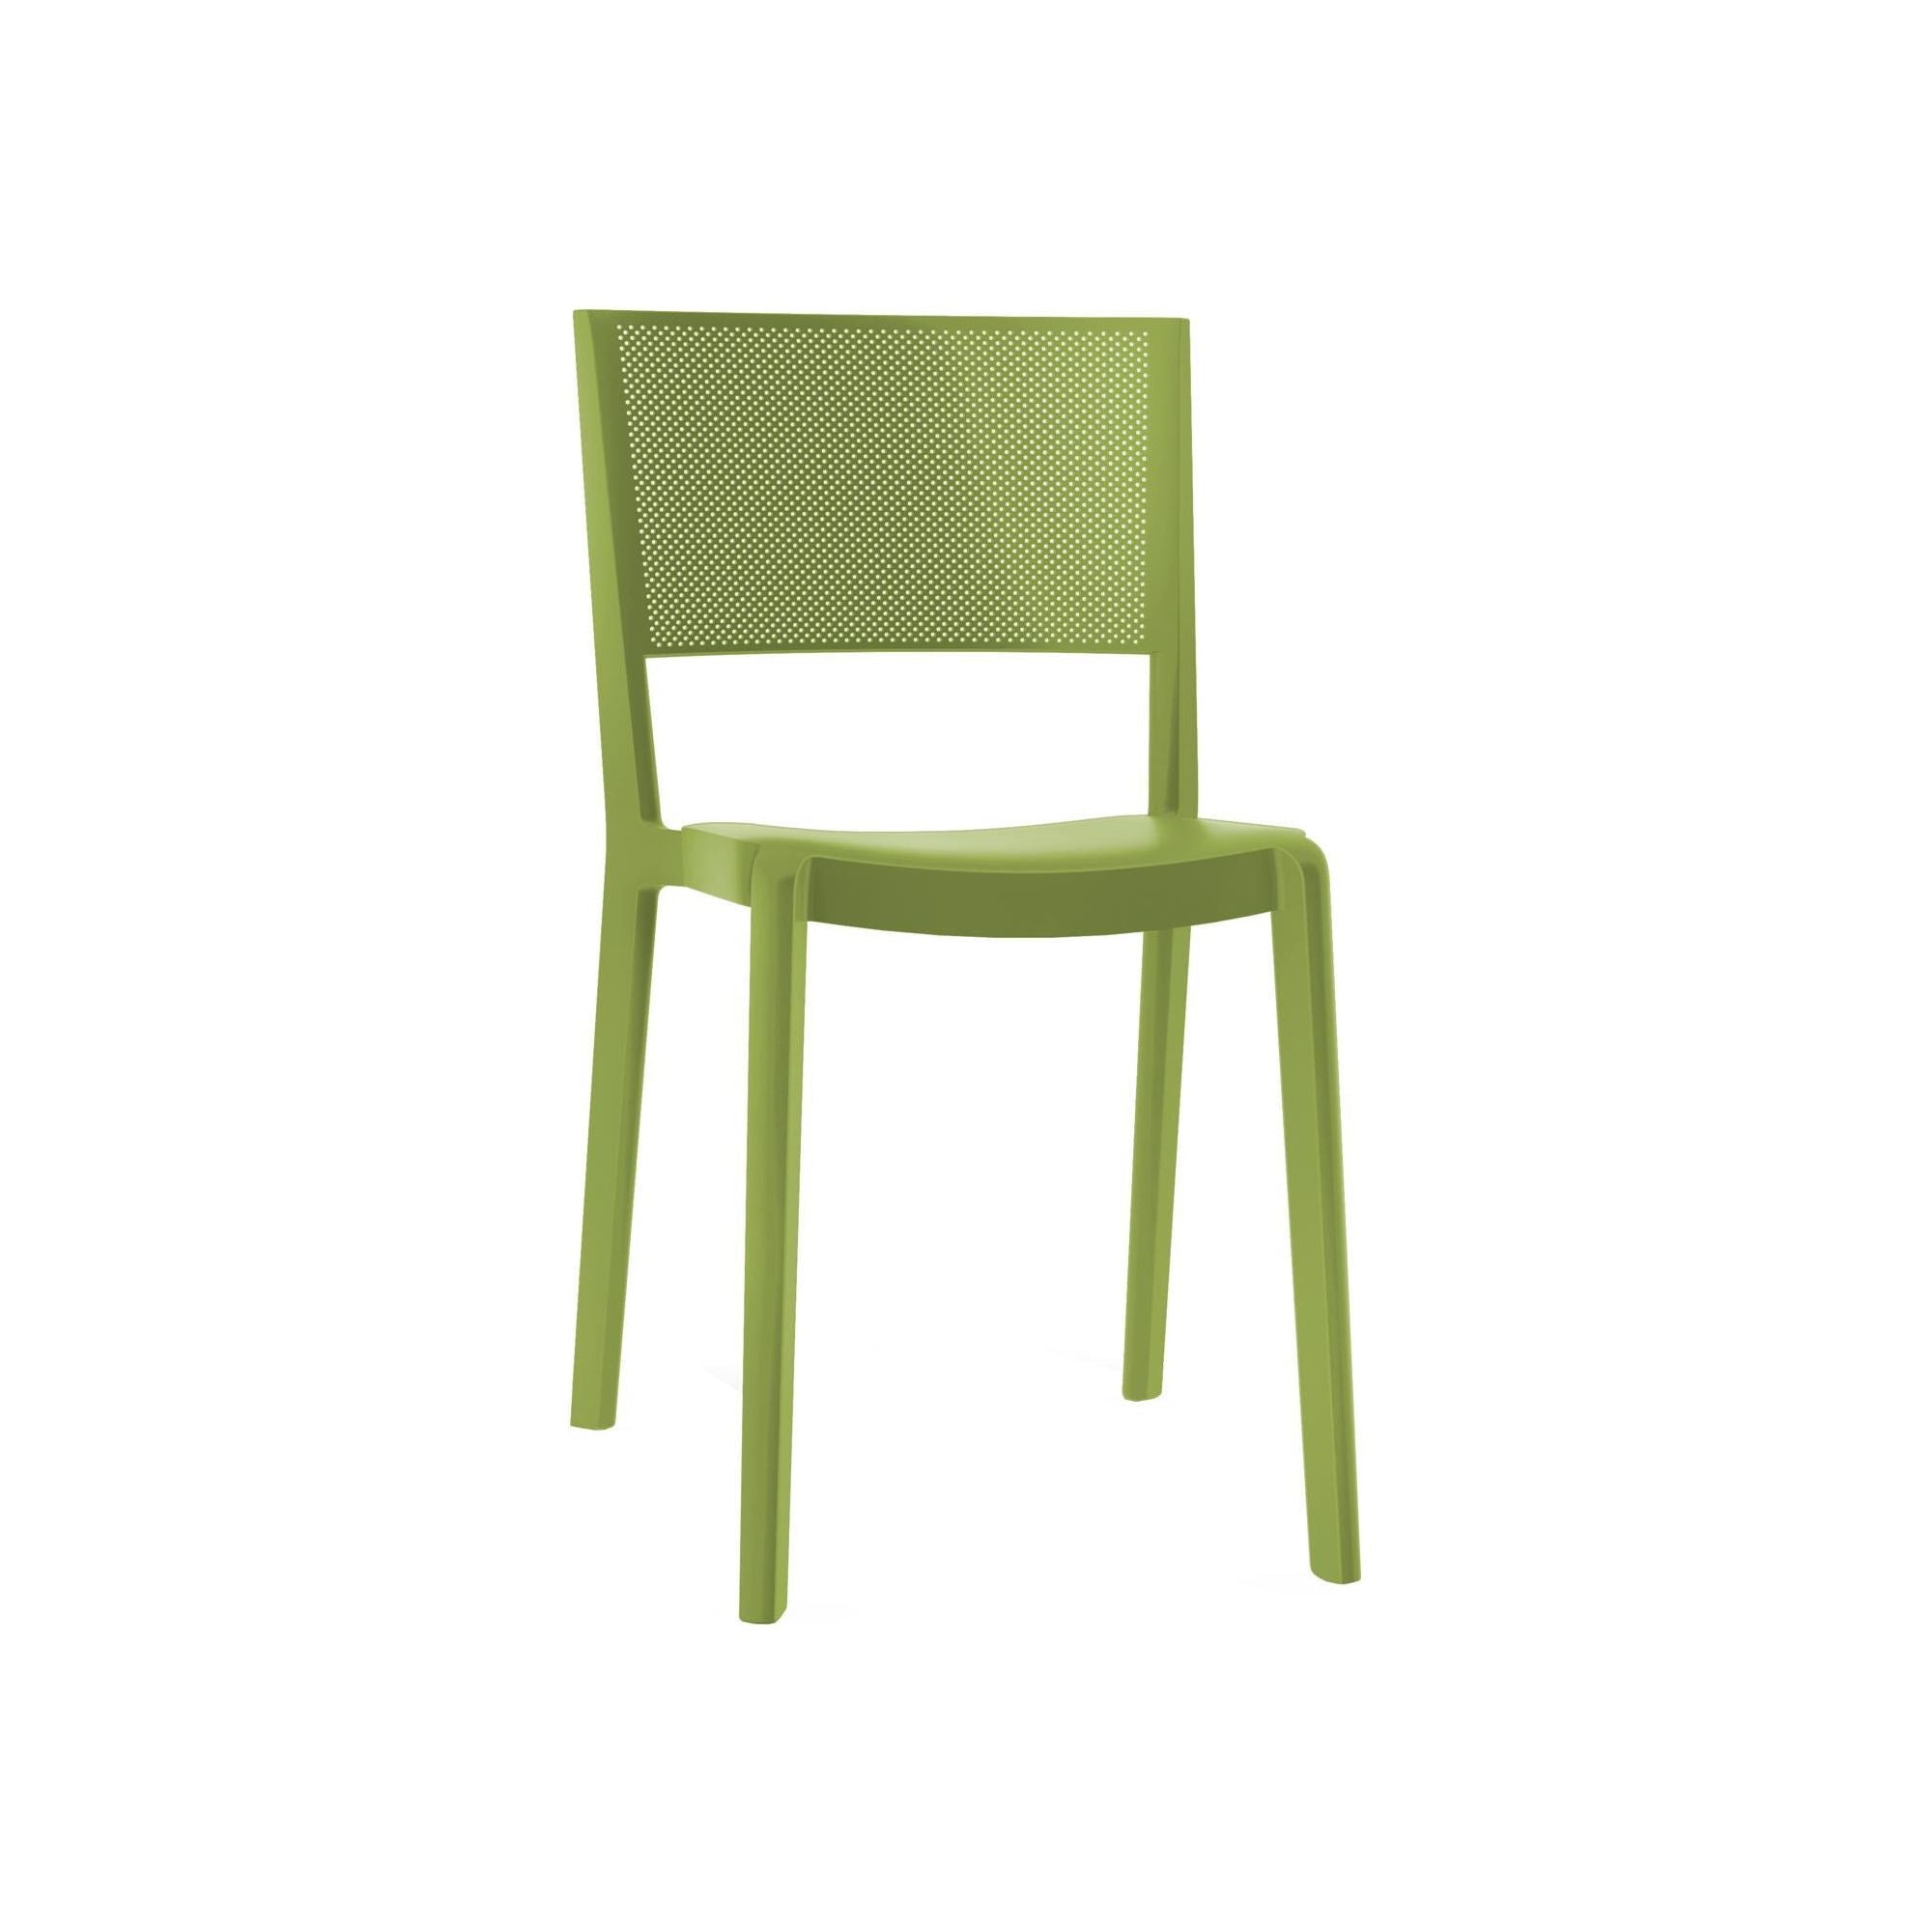 Resol spot chair indoors, outdoor olive green